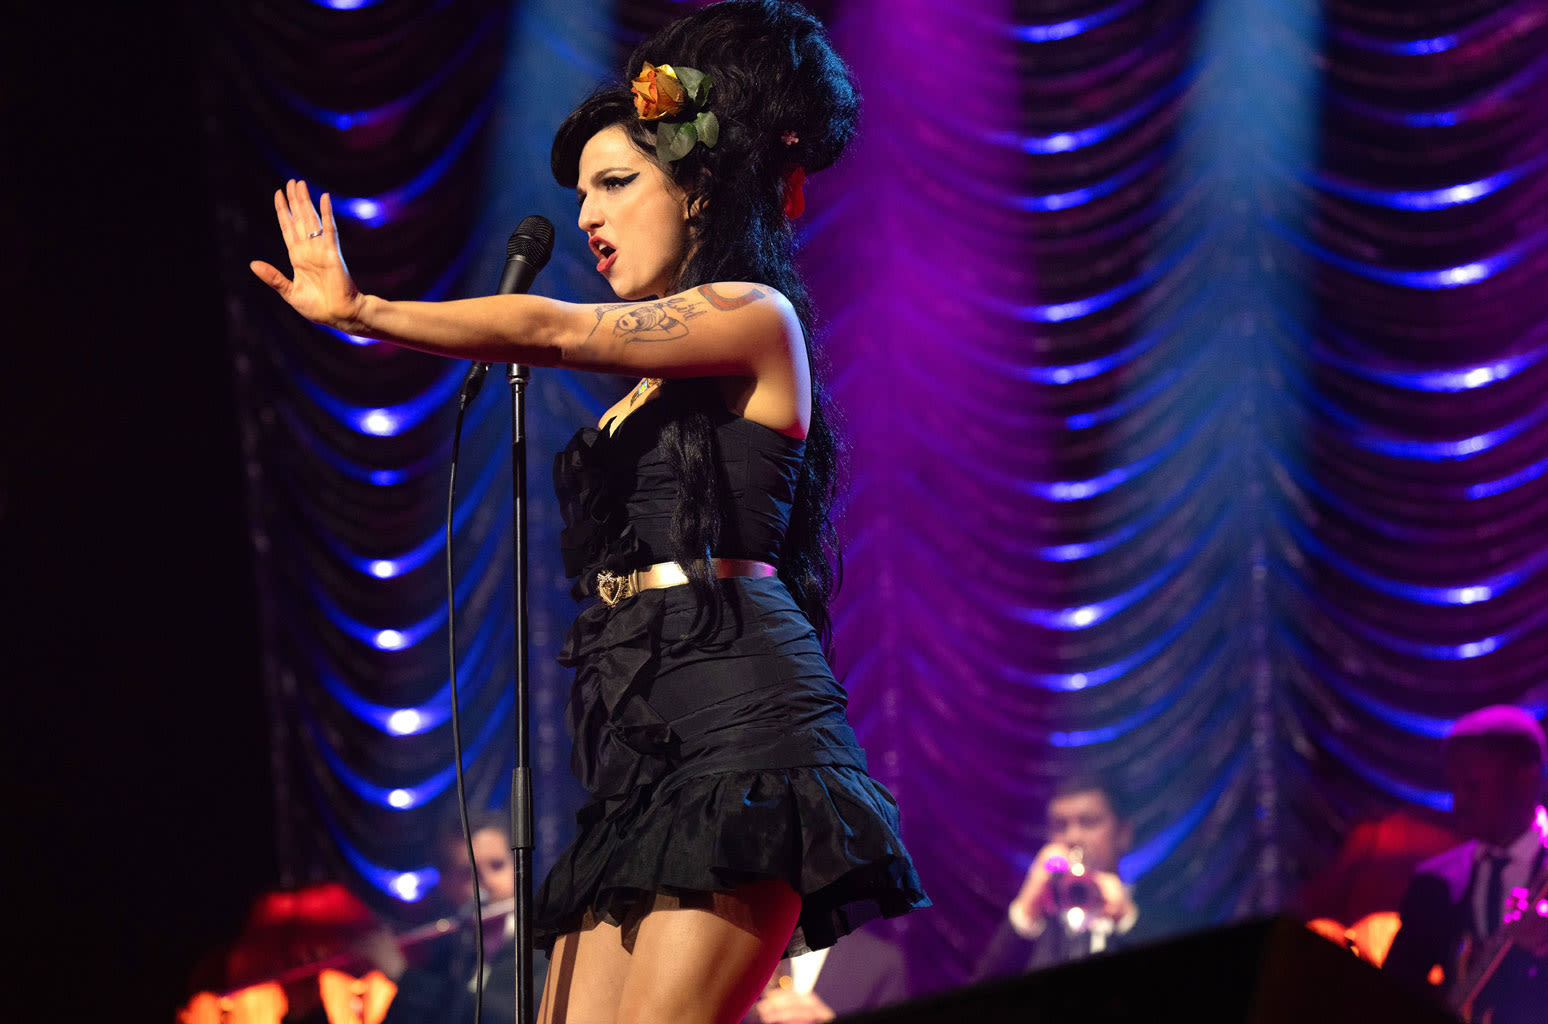 ‘Back to Black’ Music Supervisor Iain Cooke Opens Up About Capturing Amy Winehouse’s Musical Essence: ‘She’s a Classic...